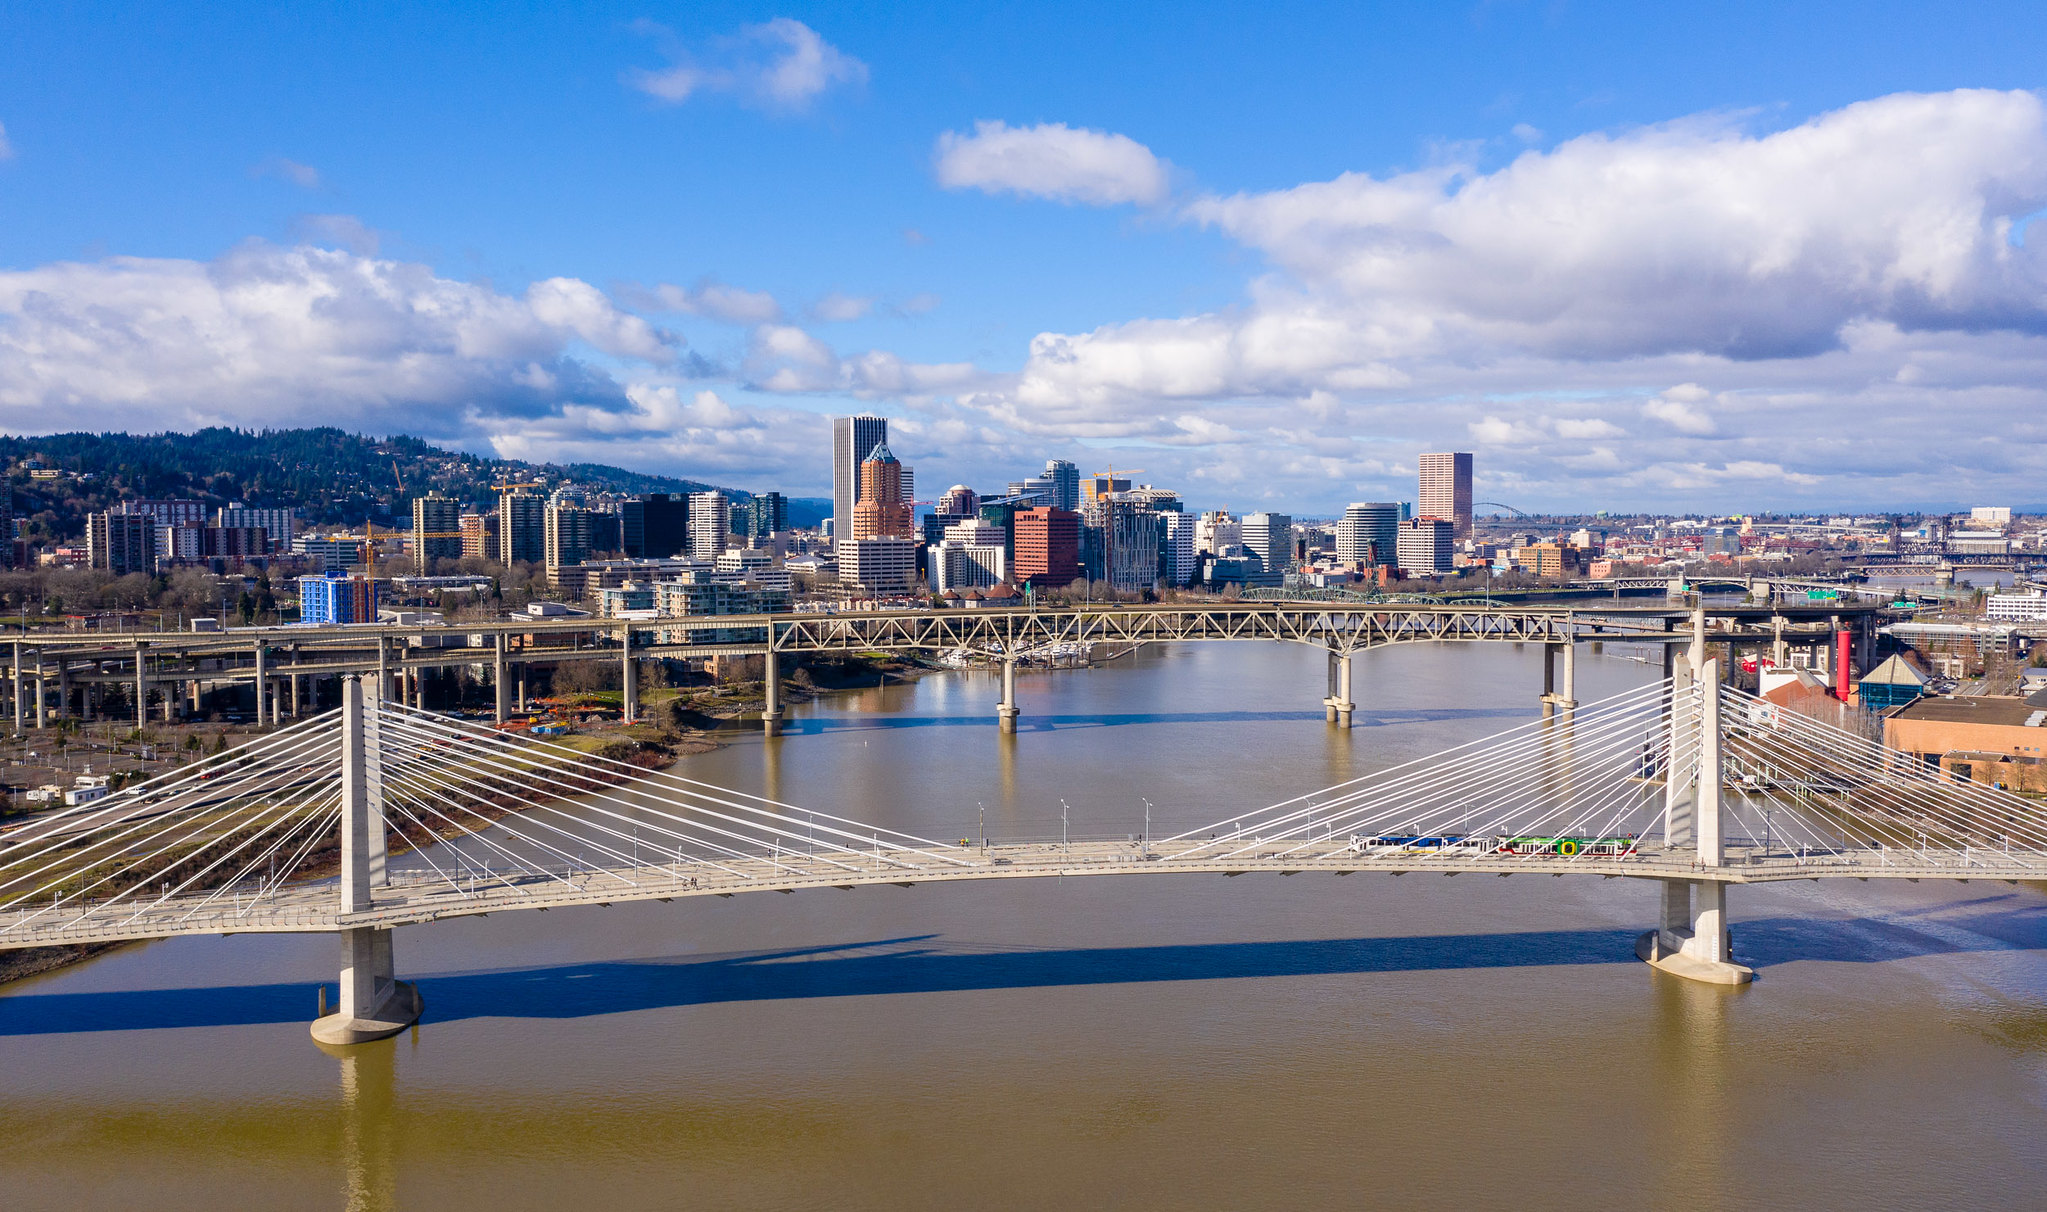 Aerial view of the Willamette River and the Tillikum and Morrison Bridges